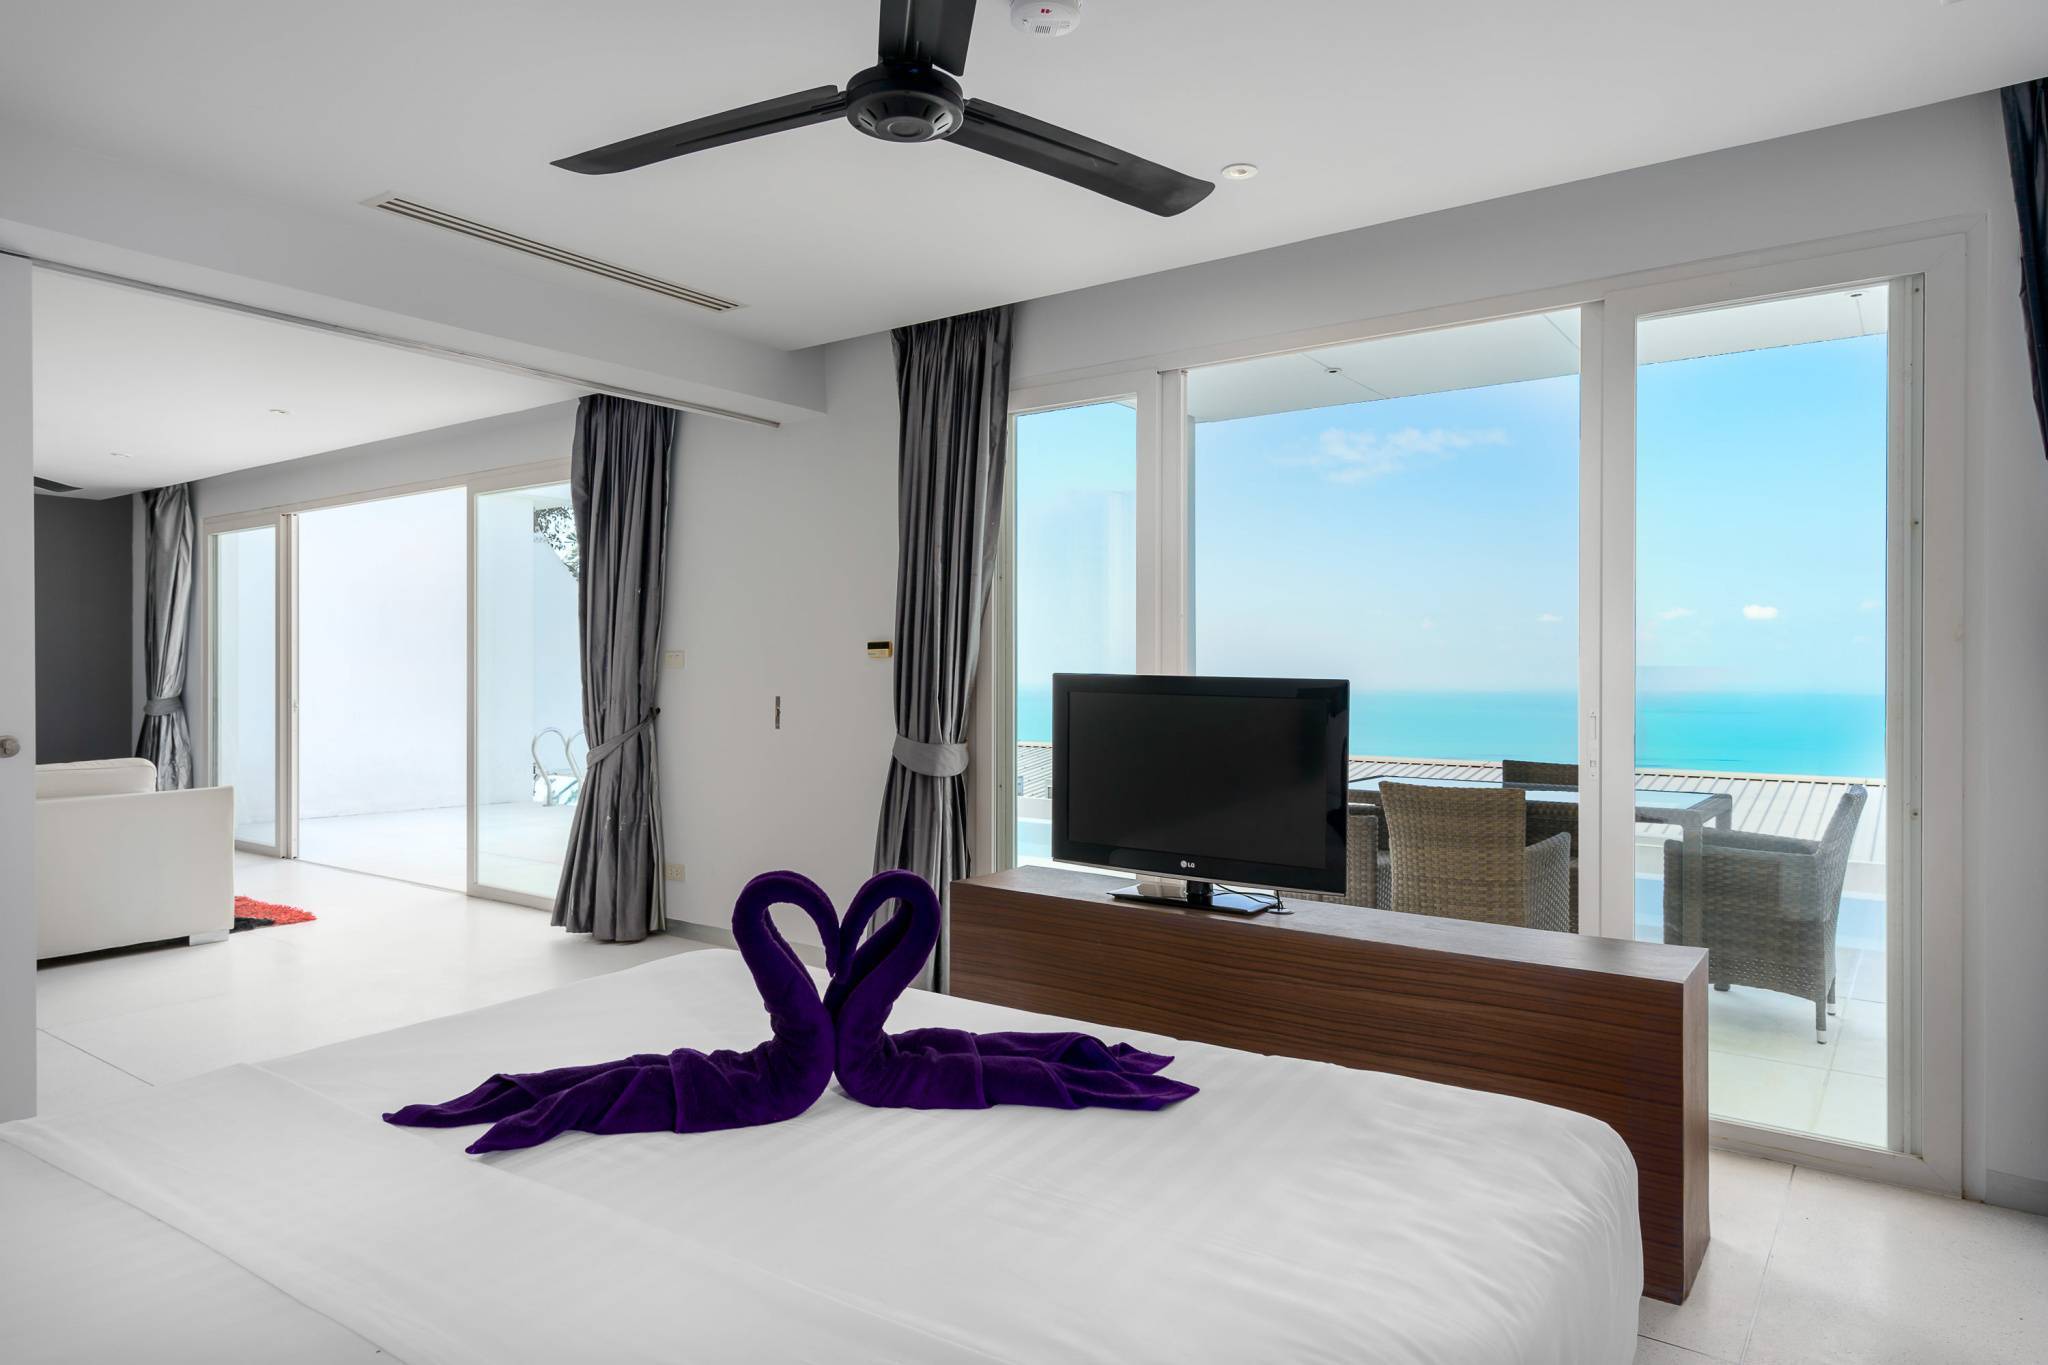 Luxury 1 Bedroom Seaview Apartment with Private Pool in 5* Resort for sale: Luxury 1 Bedroom Seaview Apartment with Private Pool in 5* Resort for sale